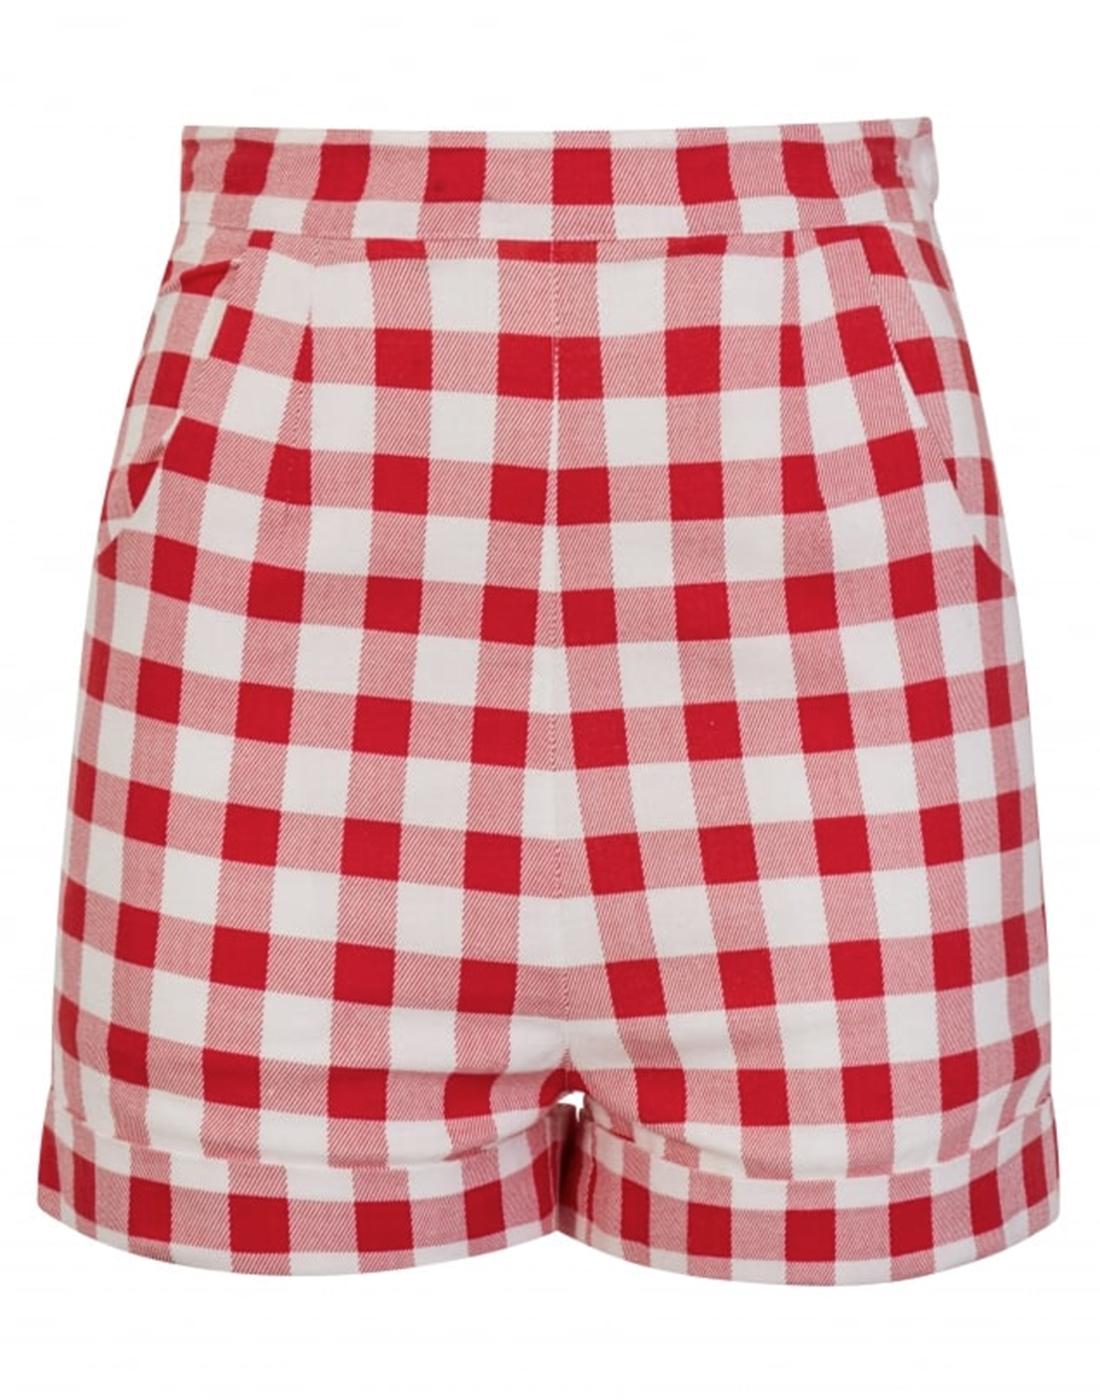 COLLECTIF Ayana Retro 50s Style High Waist Gingham Shorts